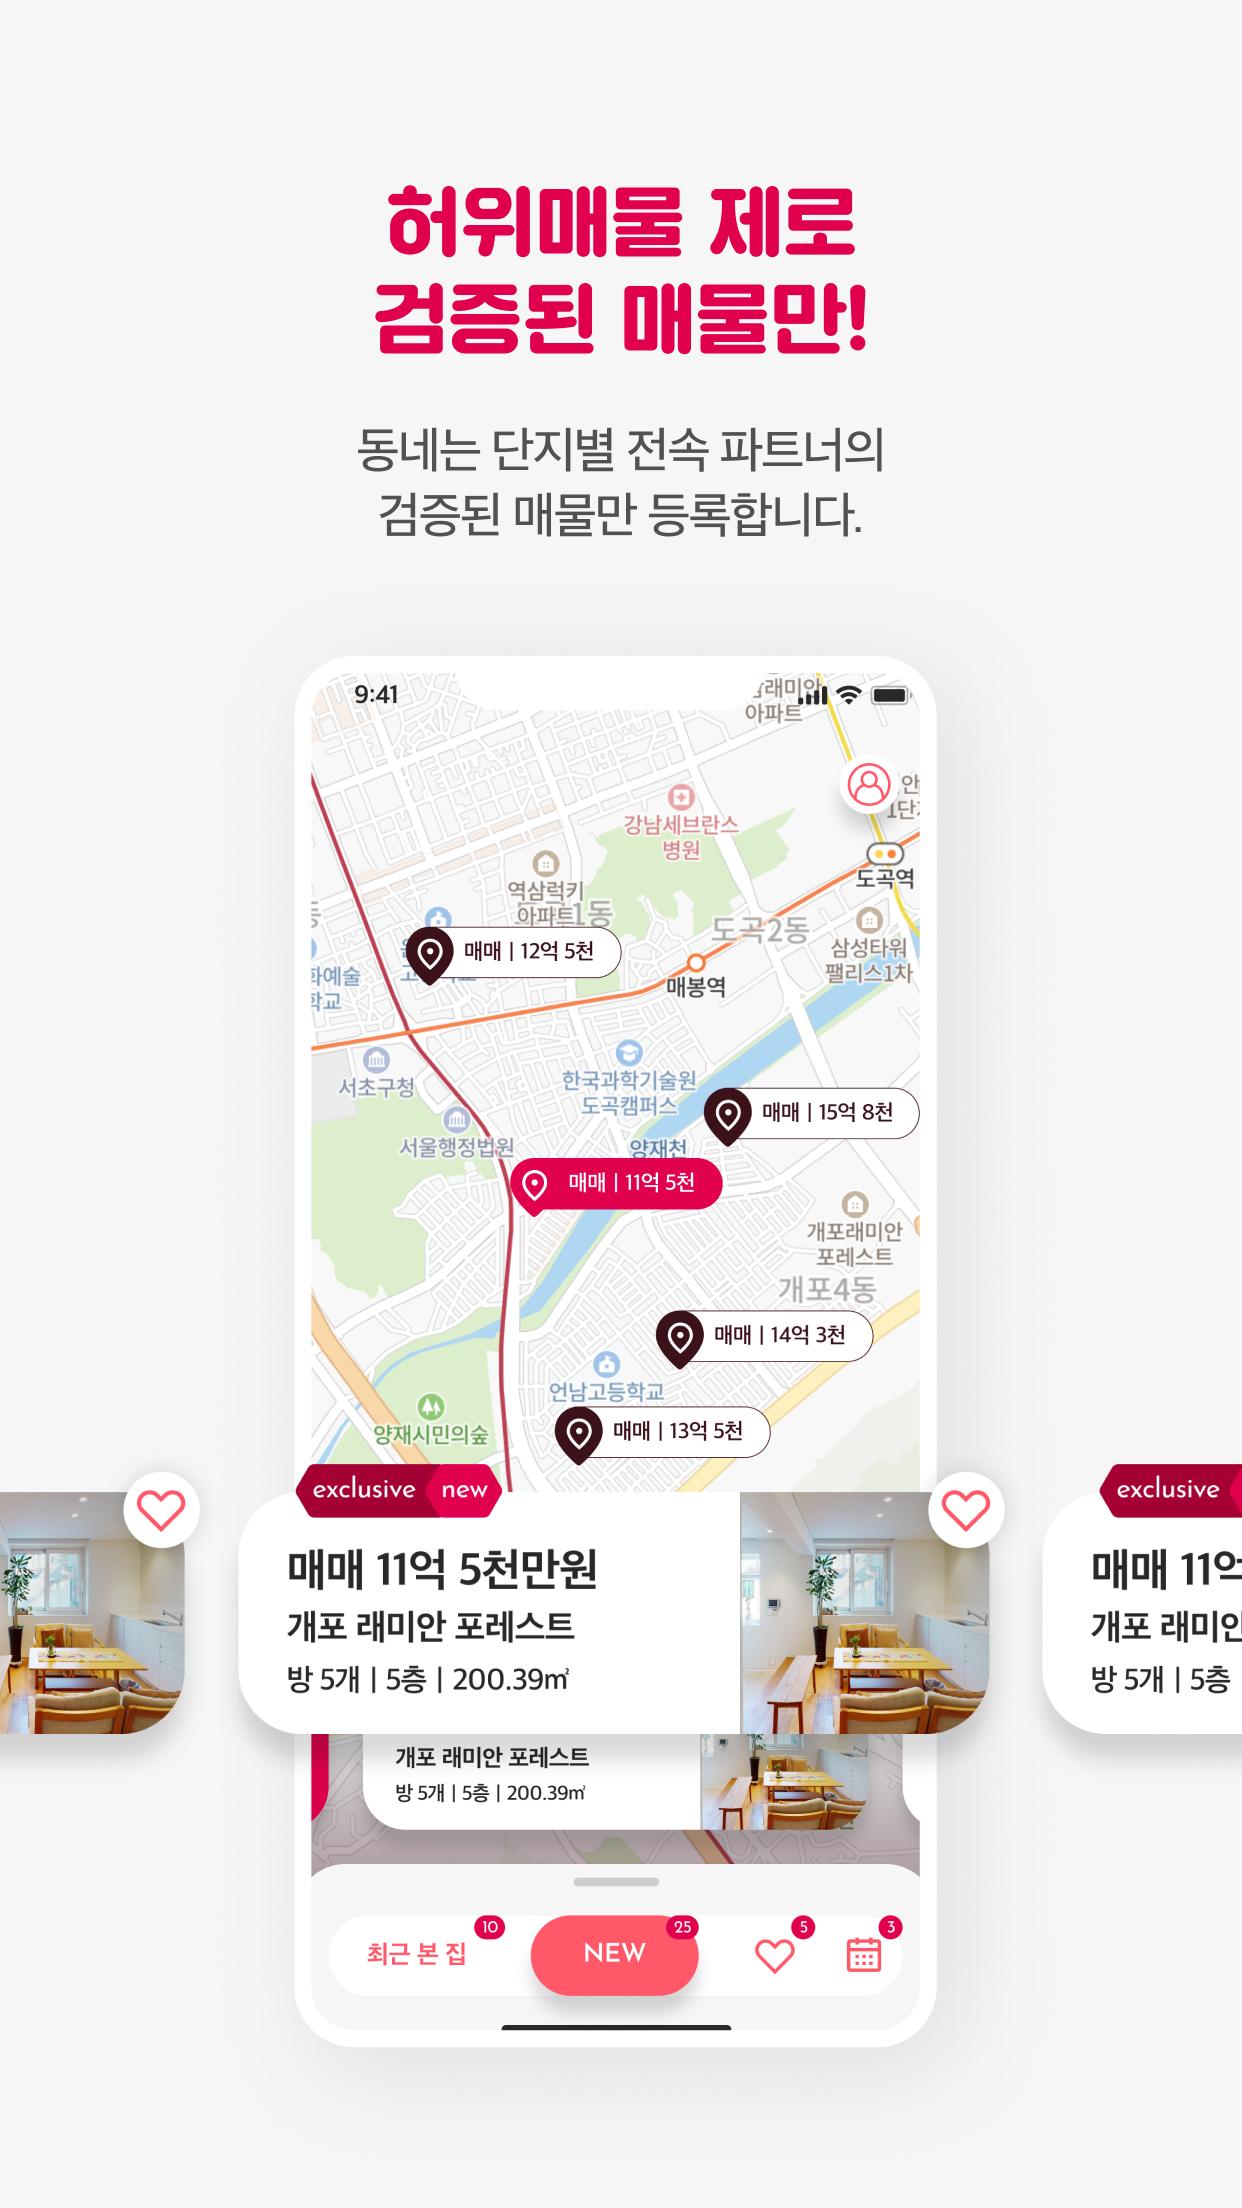 Dongnae Real Estate: Find Your Home 1.0.2 Screenshot 3